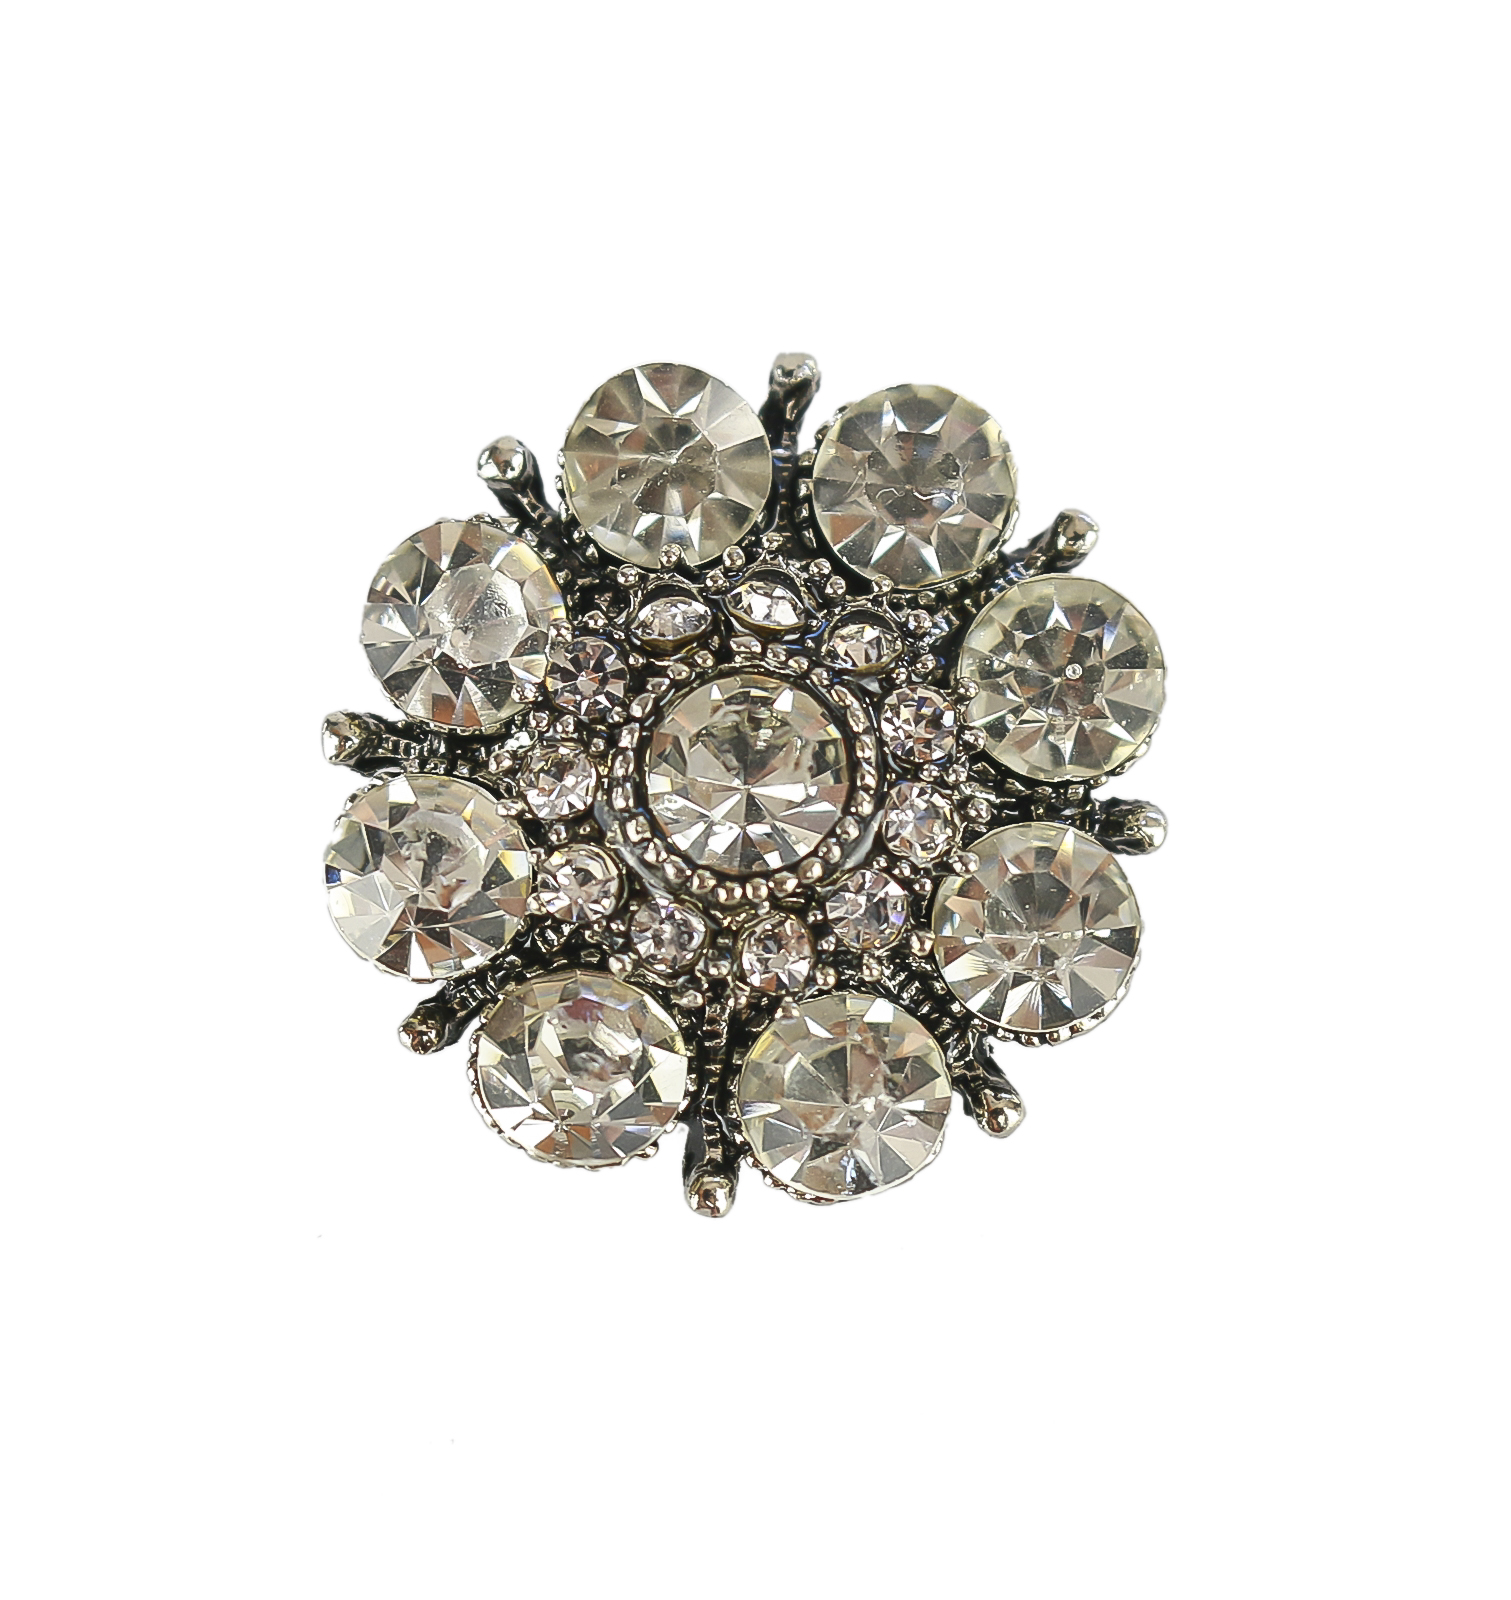 Metal Shank Buttons with Rhinestones, 25 mm (10 pcs/pack) Code: N19210